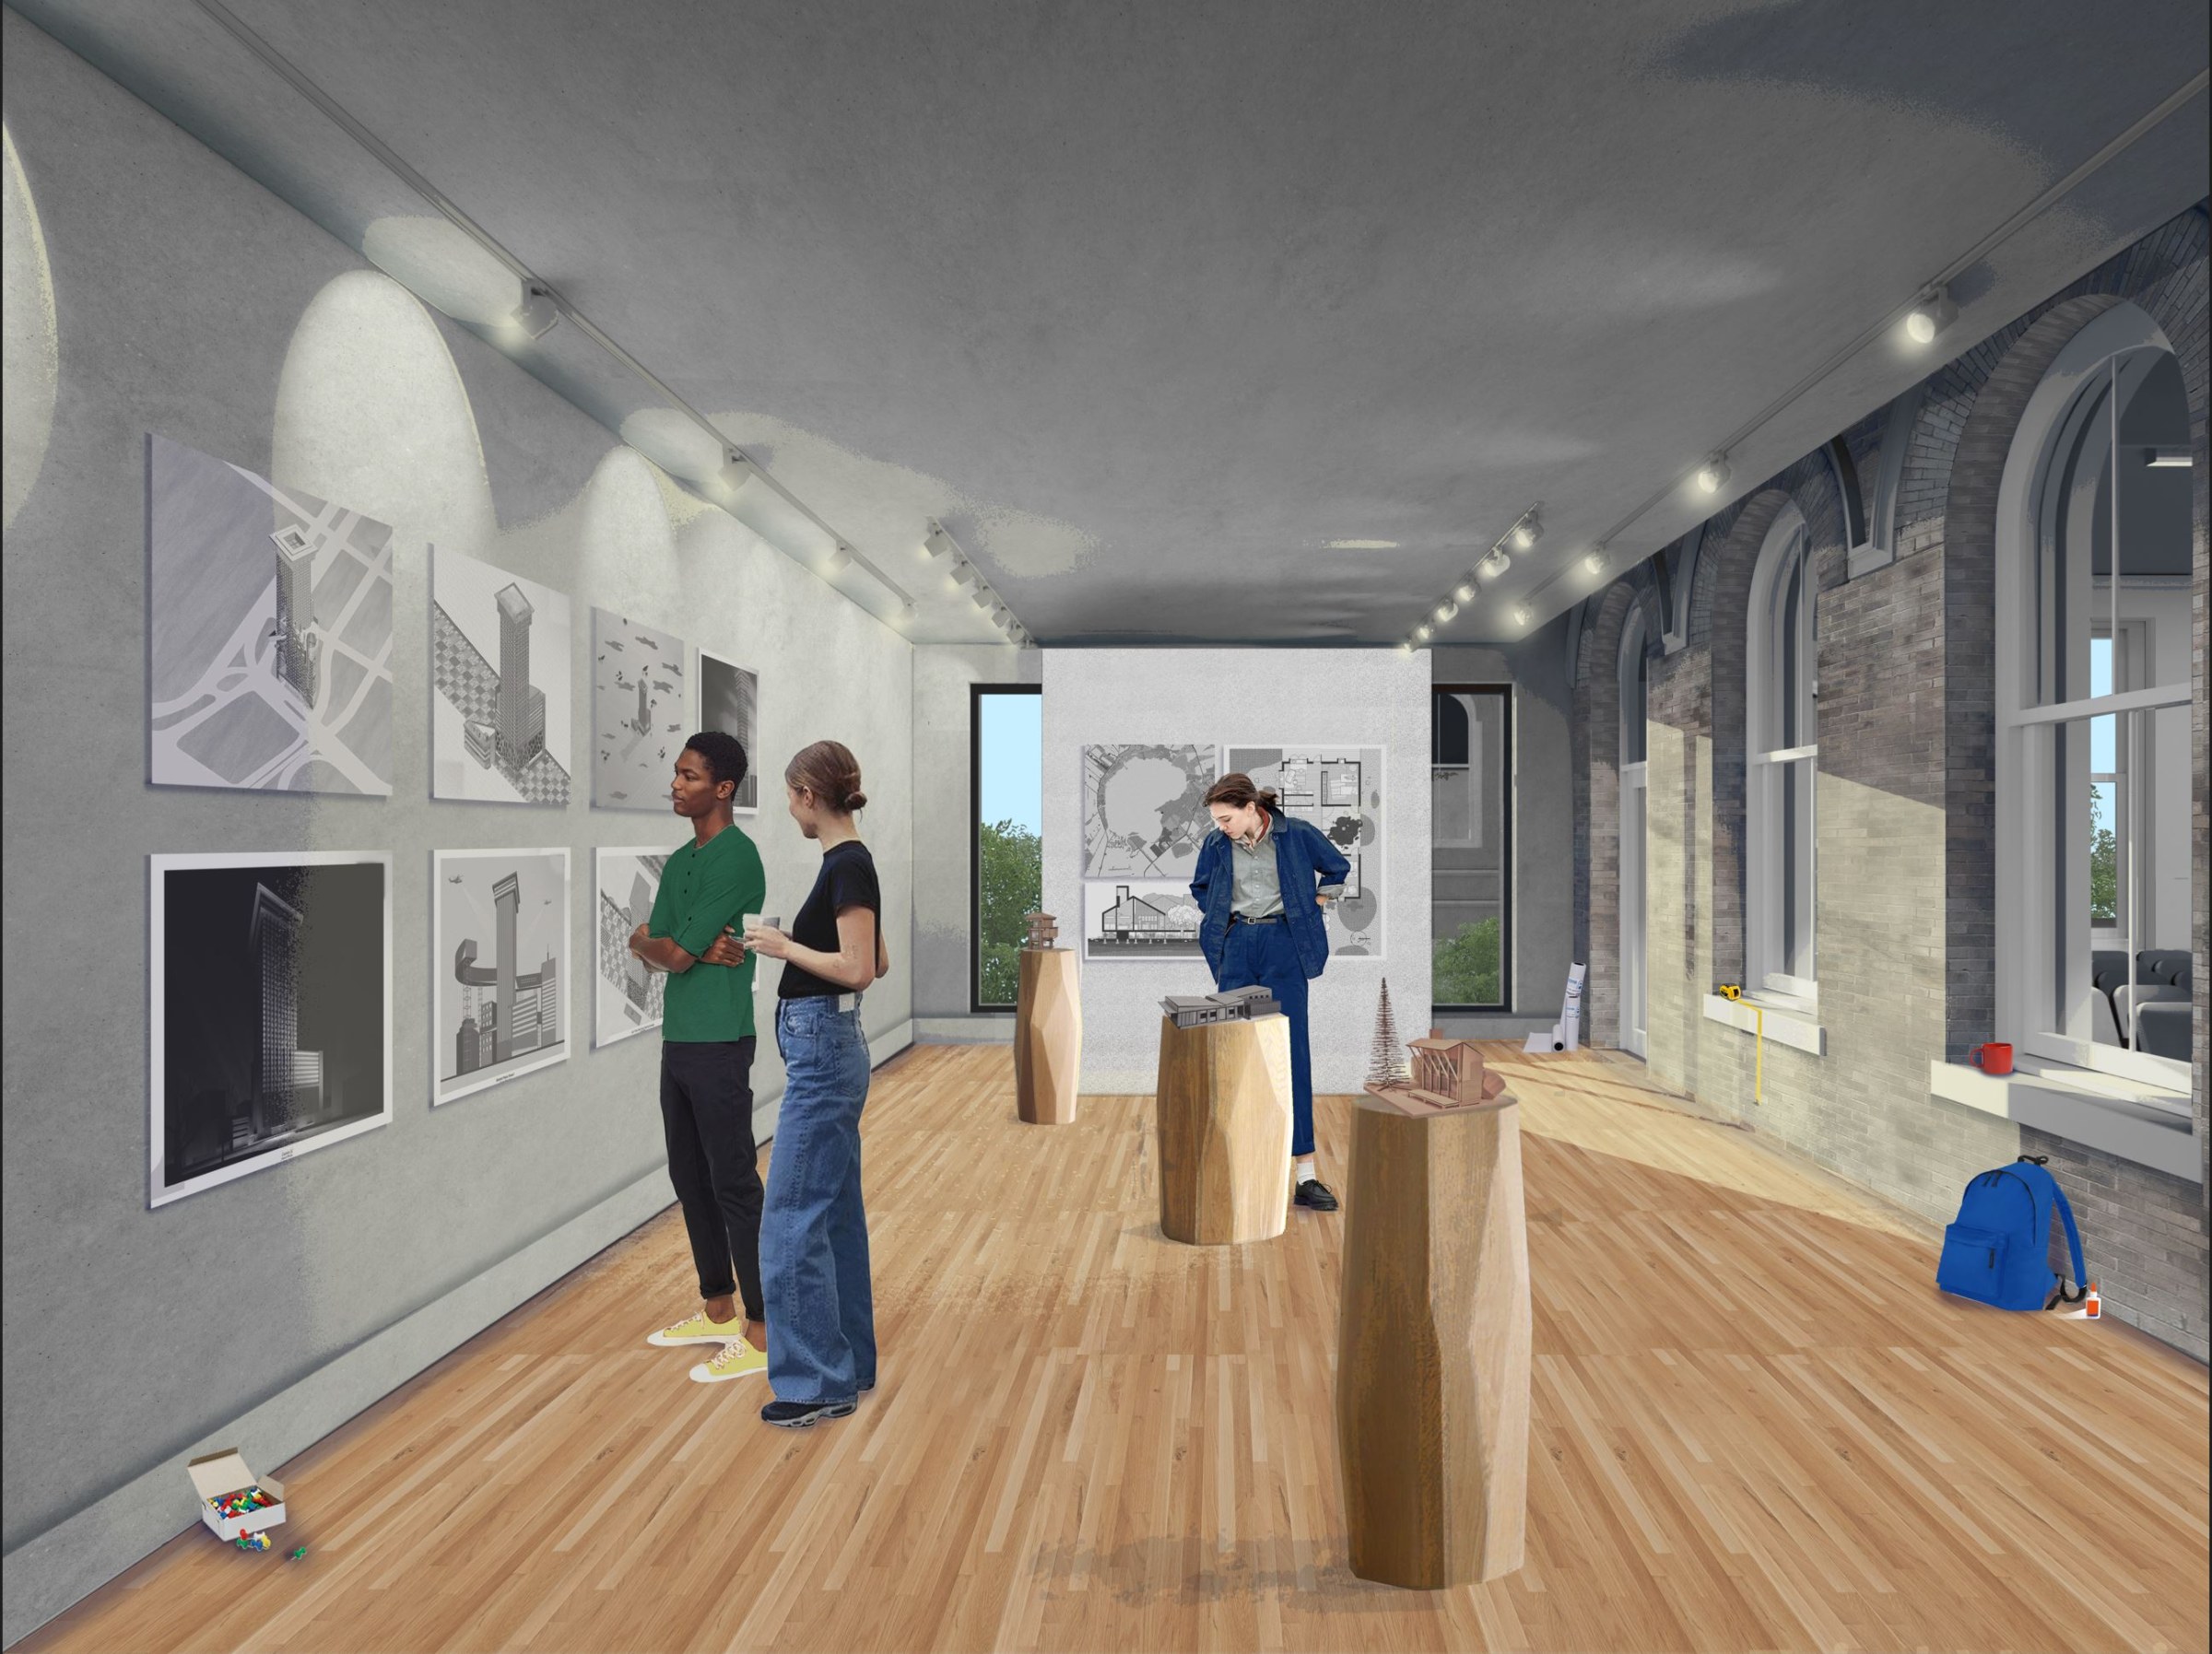 Interior perspective render from one end of a long narrow gallery space looking toward the far end with wall-mounted drawings on the left side, objects on pedestals in the middle, and windows on the right side.